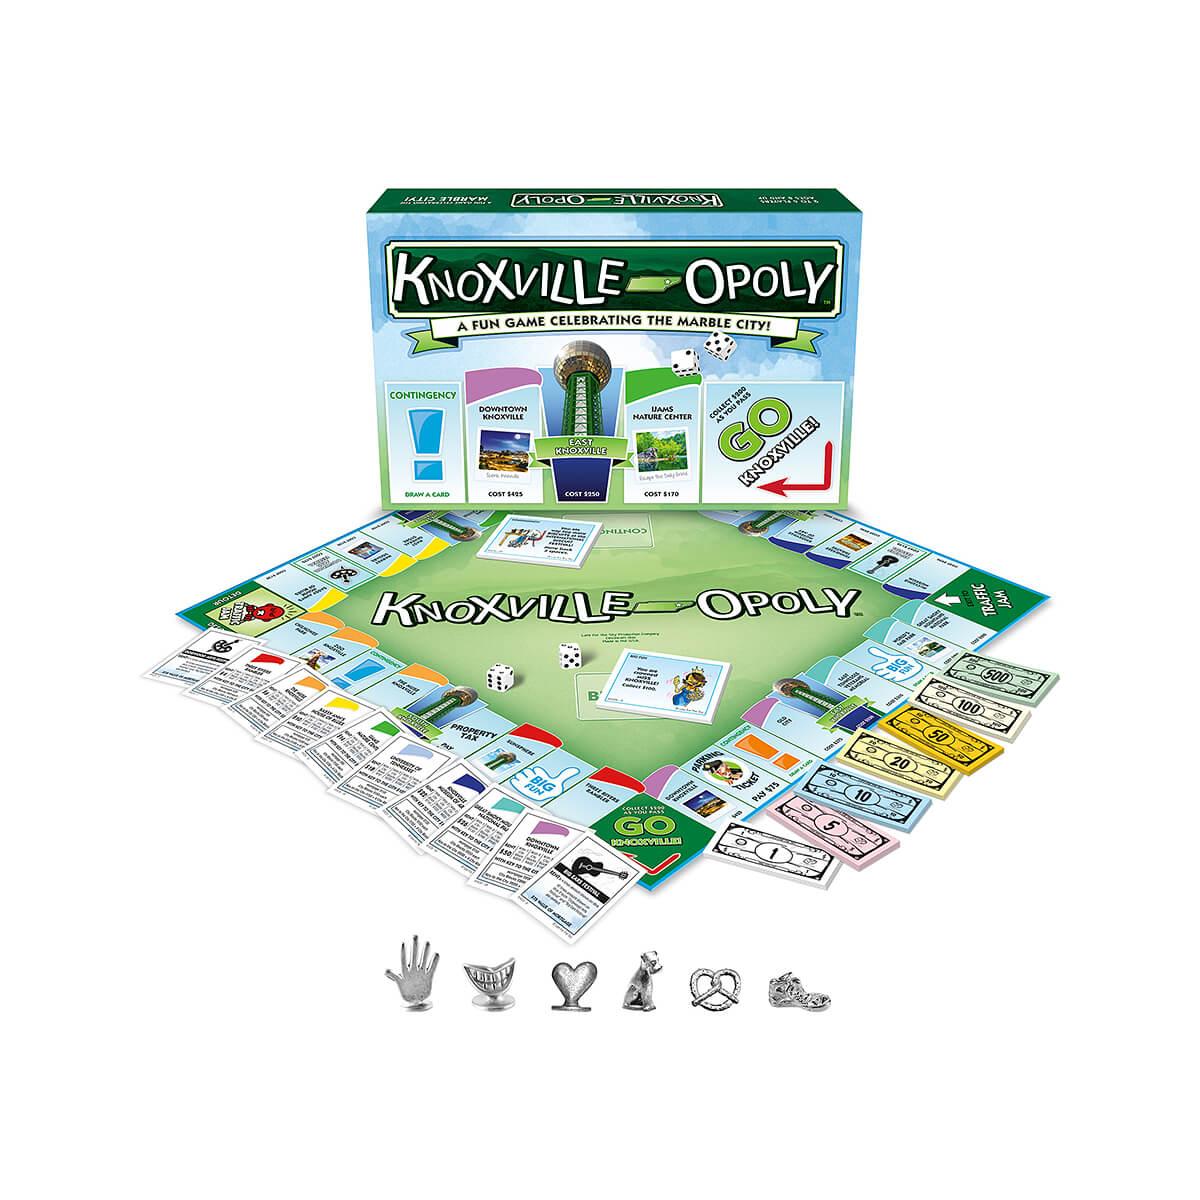  Knoxville- Opoly Game